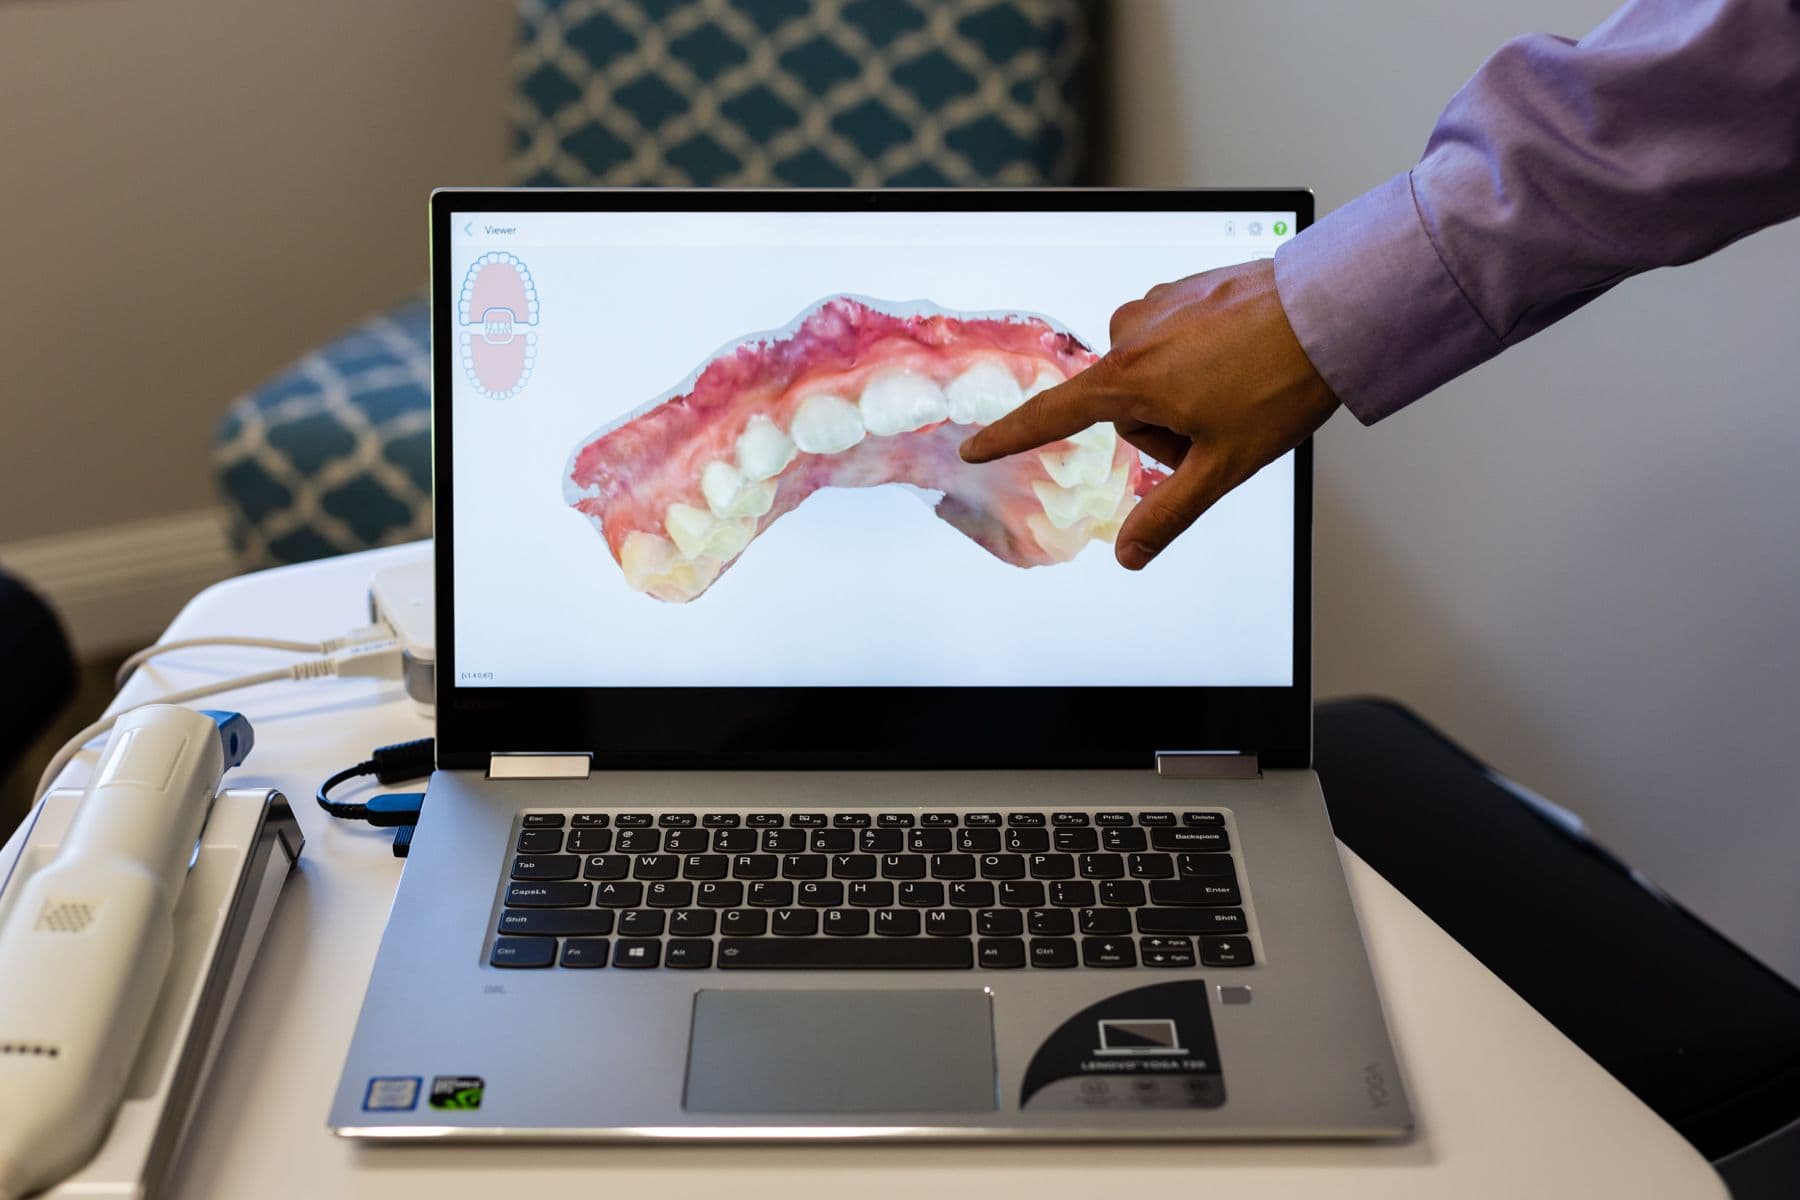 Dr. Harris pointing out a scan of a patient's teeth